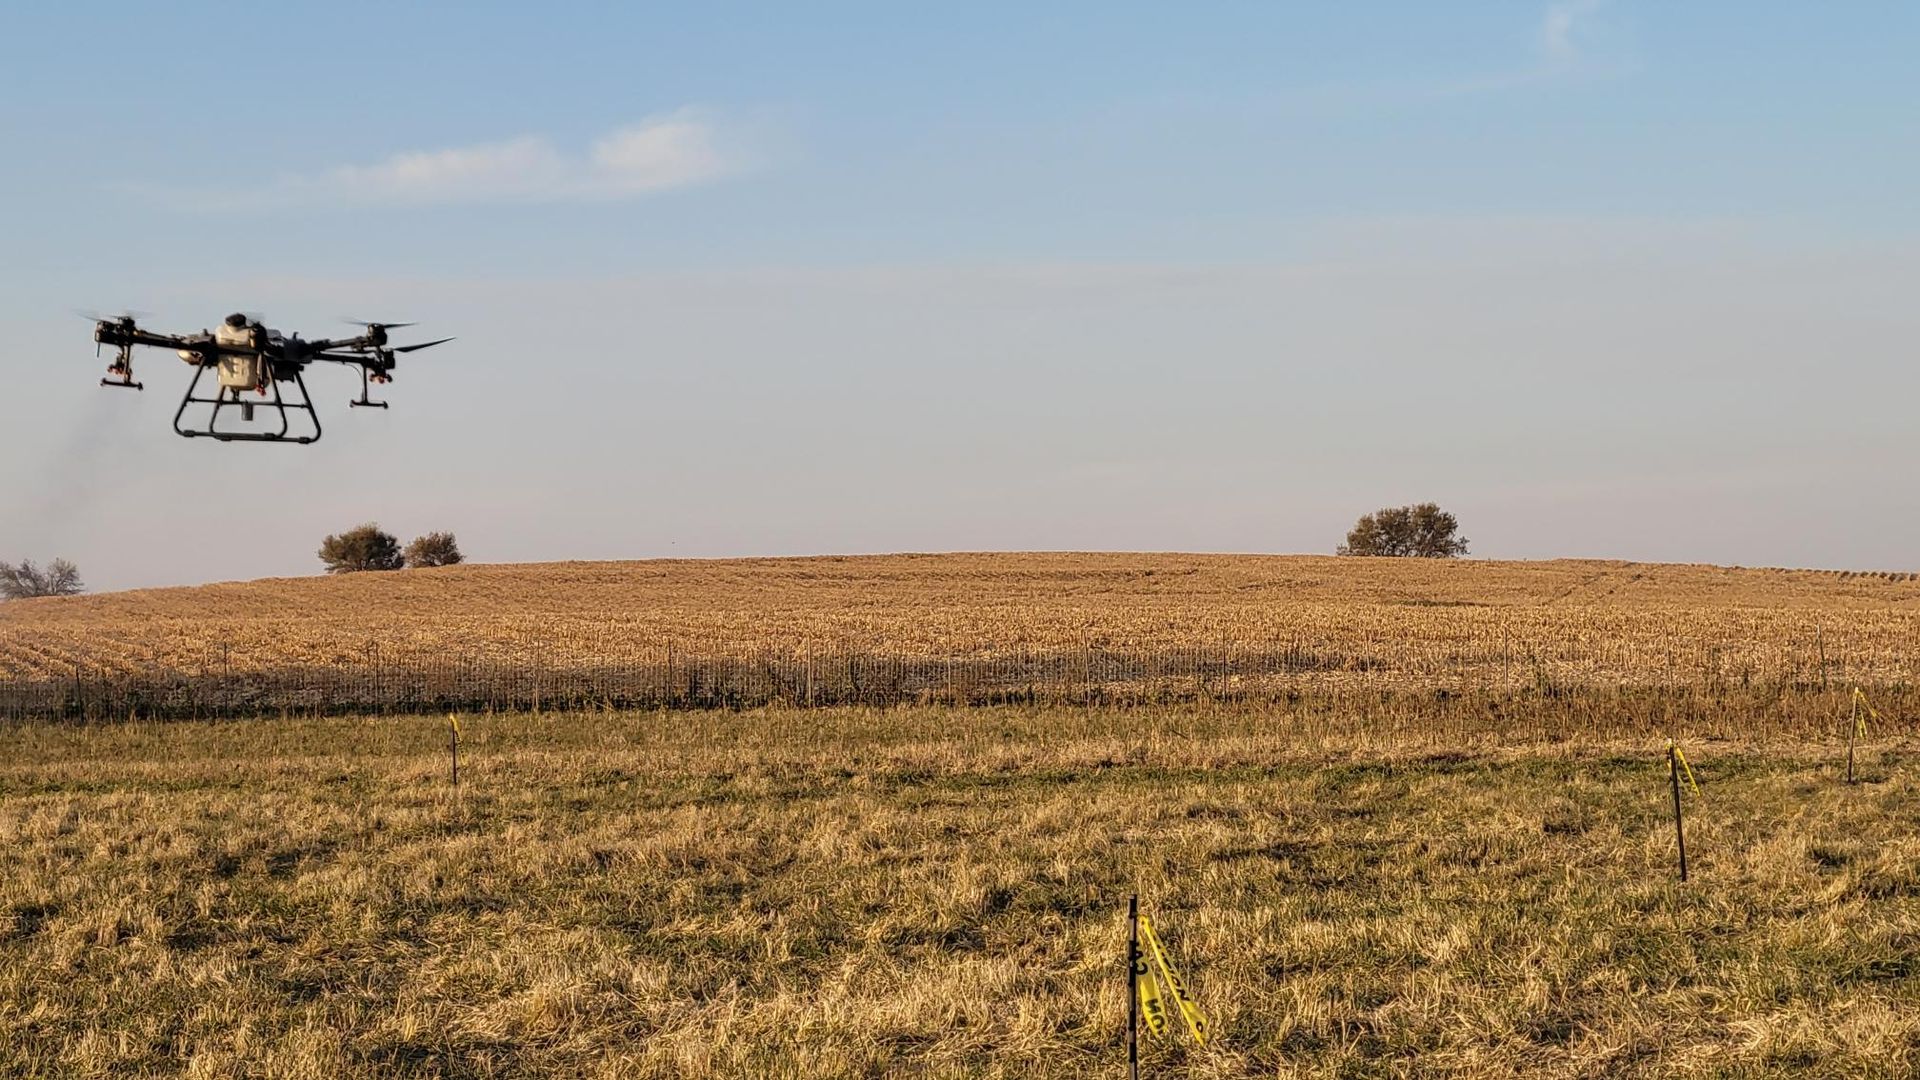 Rantizo became the first company approved to legally fly the DJI Agras T-30 drone for agricultural spraying in November 2021